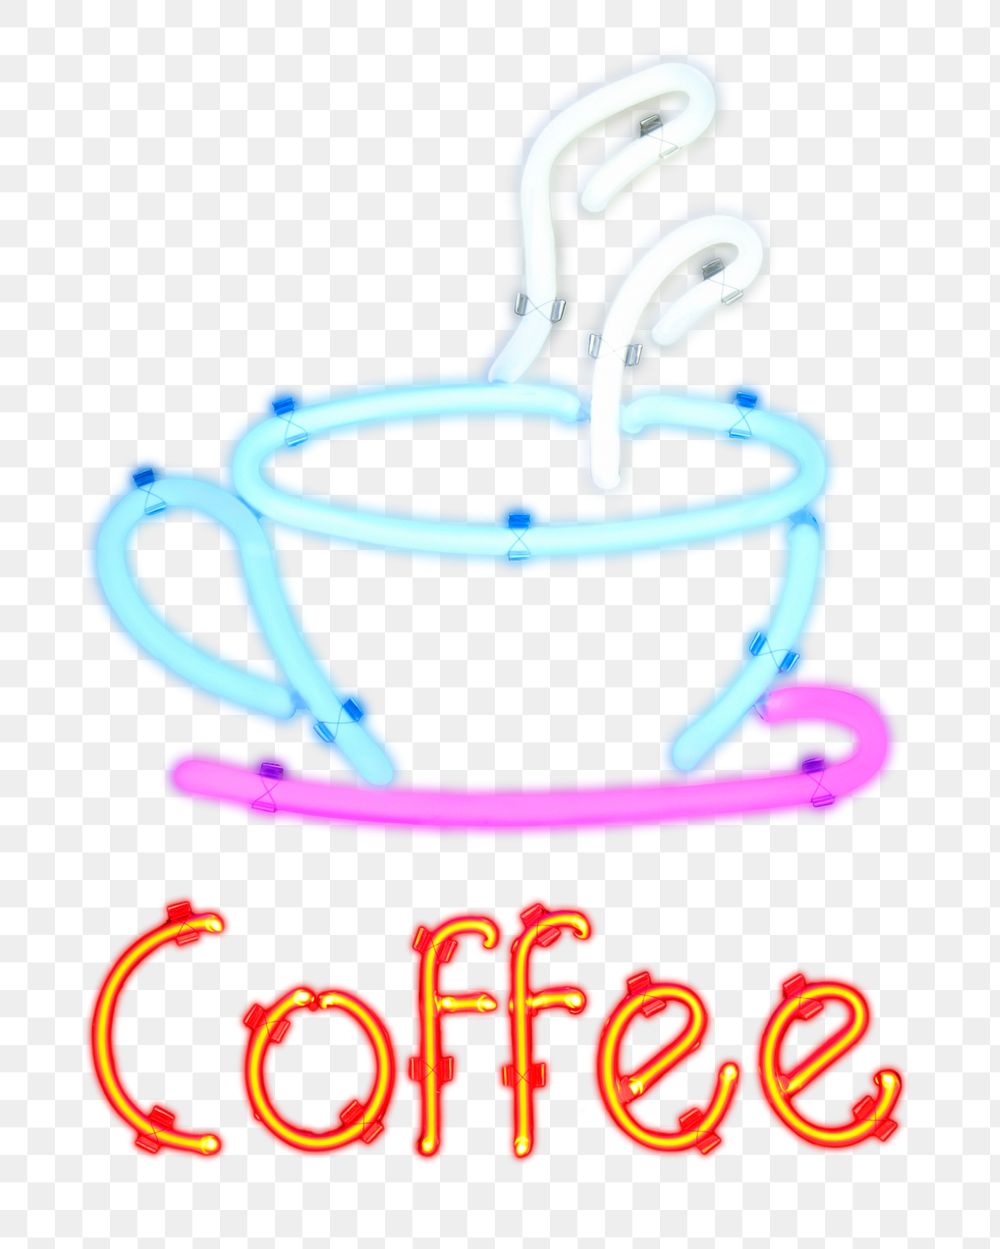 Coffee neon sign png sticker, cafe image on transparent background